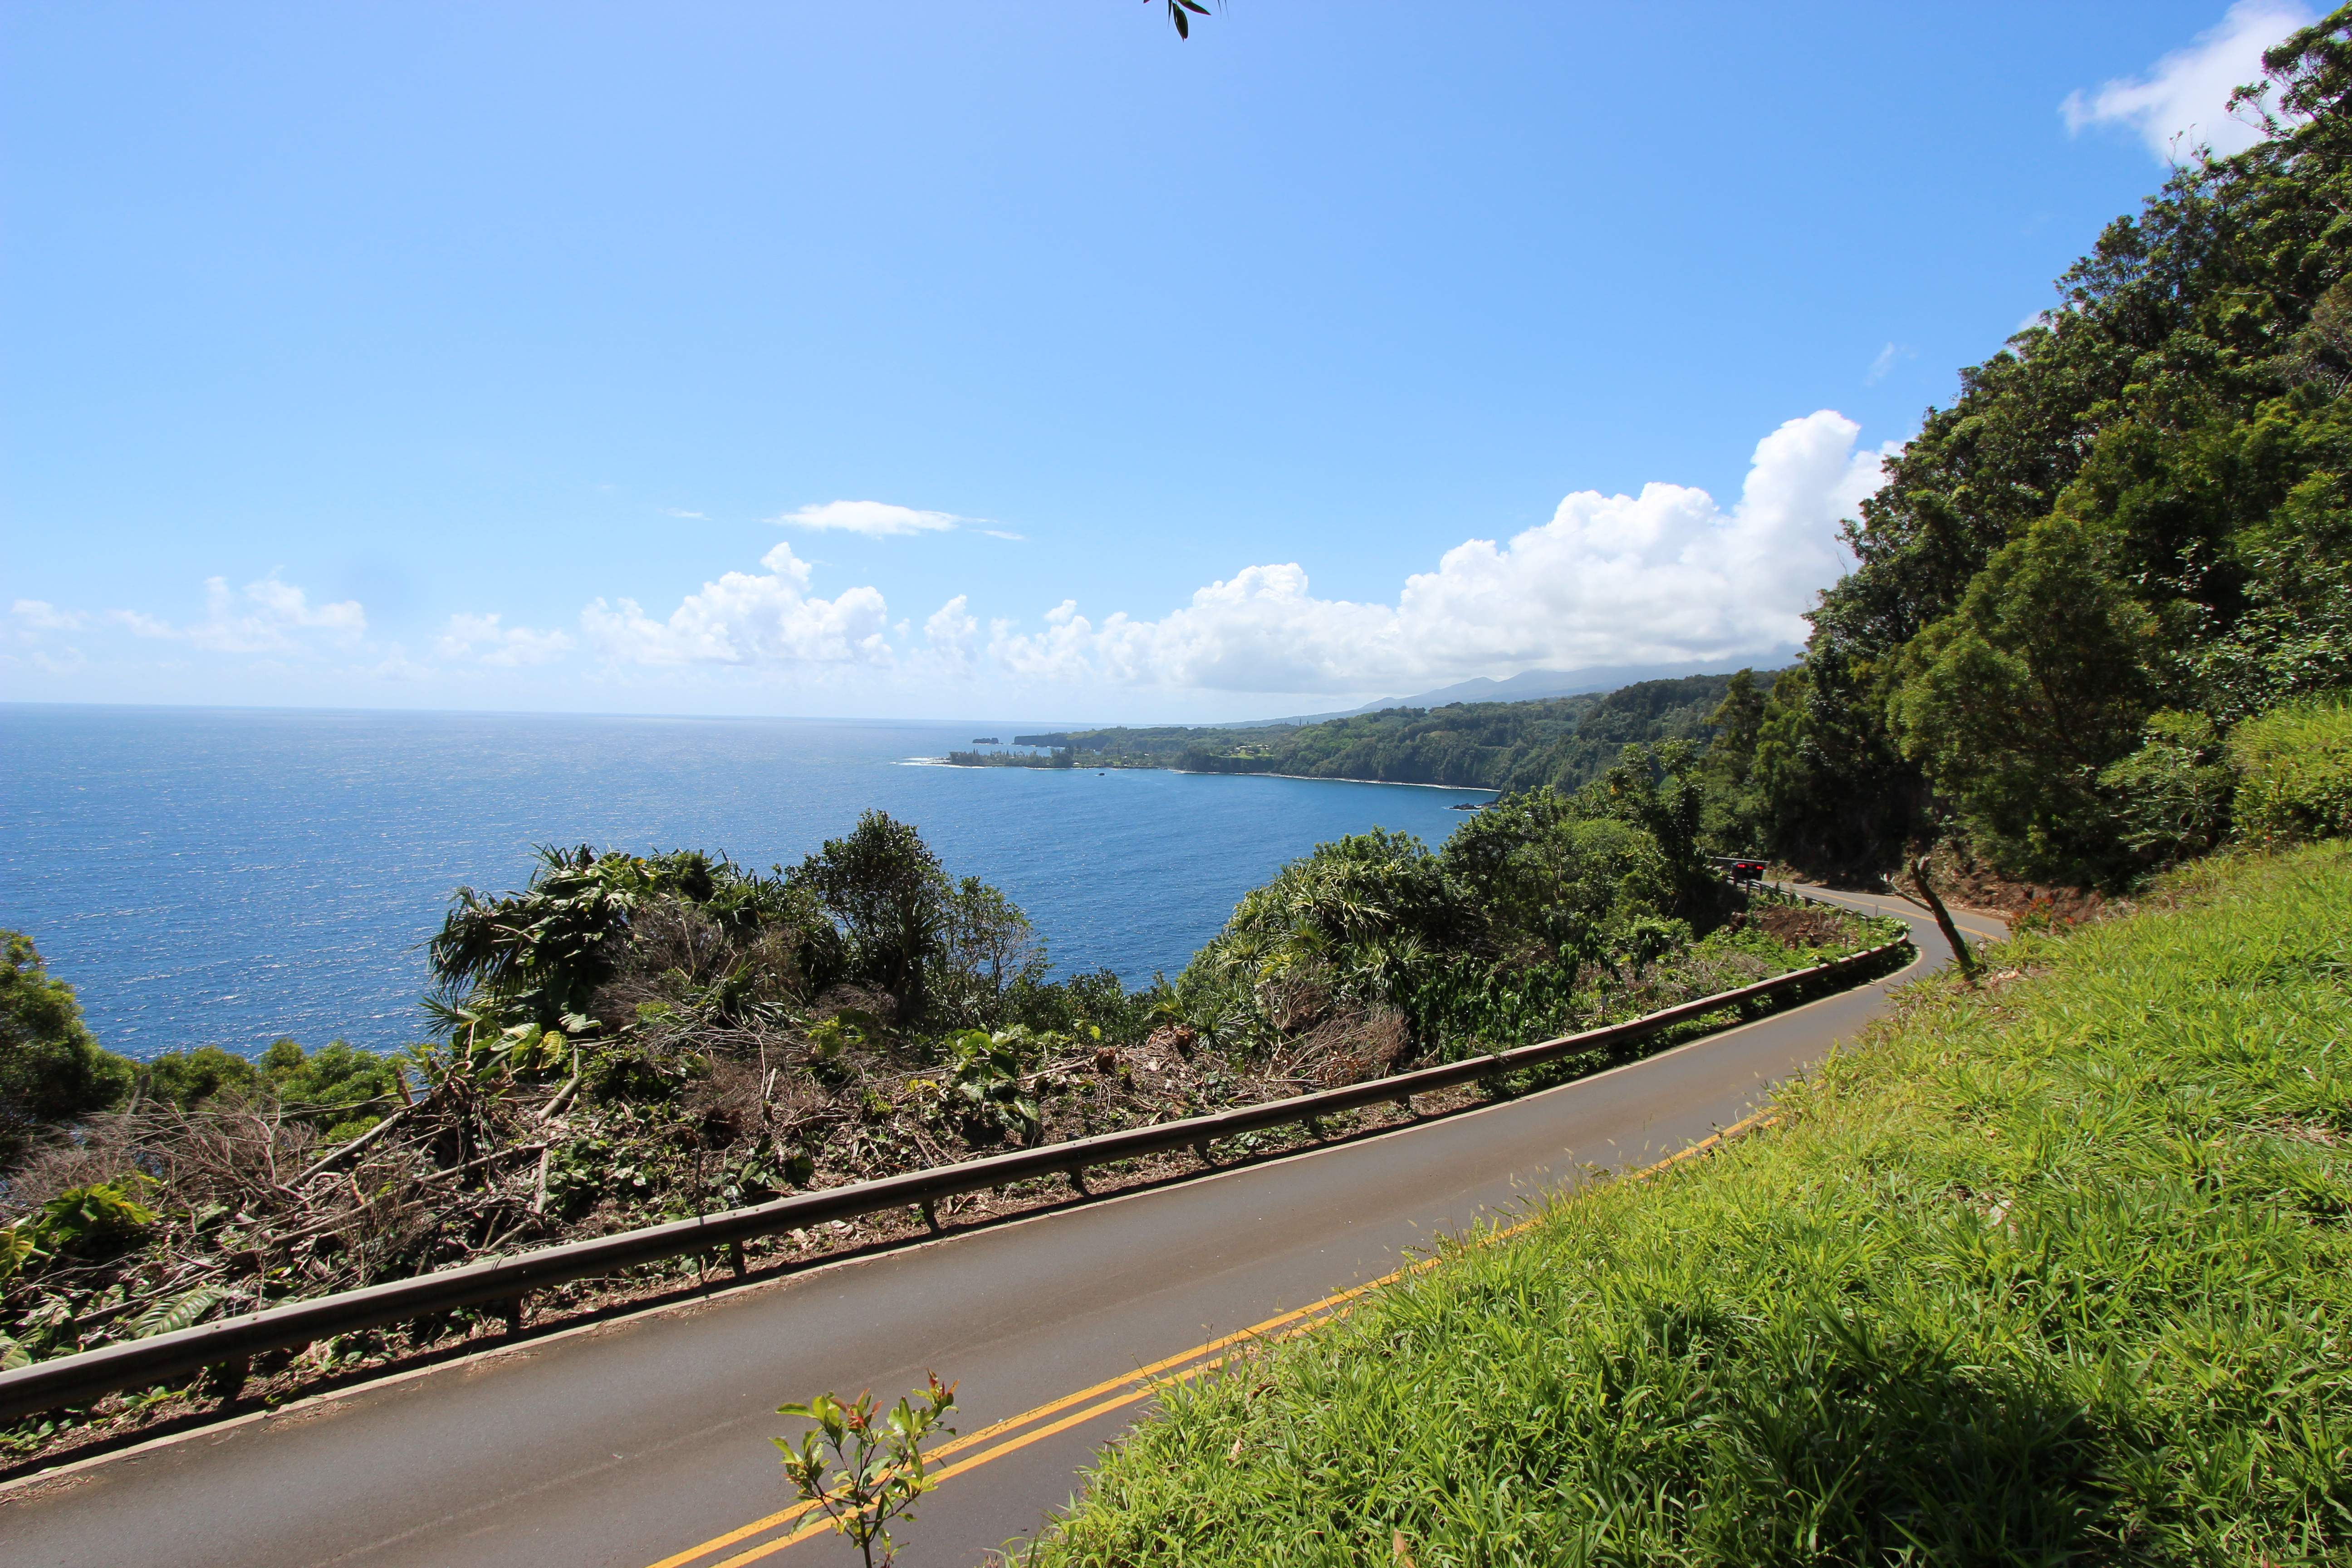 Road to Hana – road for the road’s sake, part I